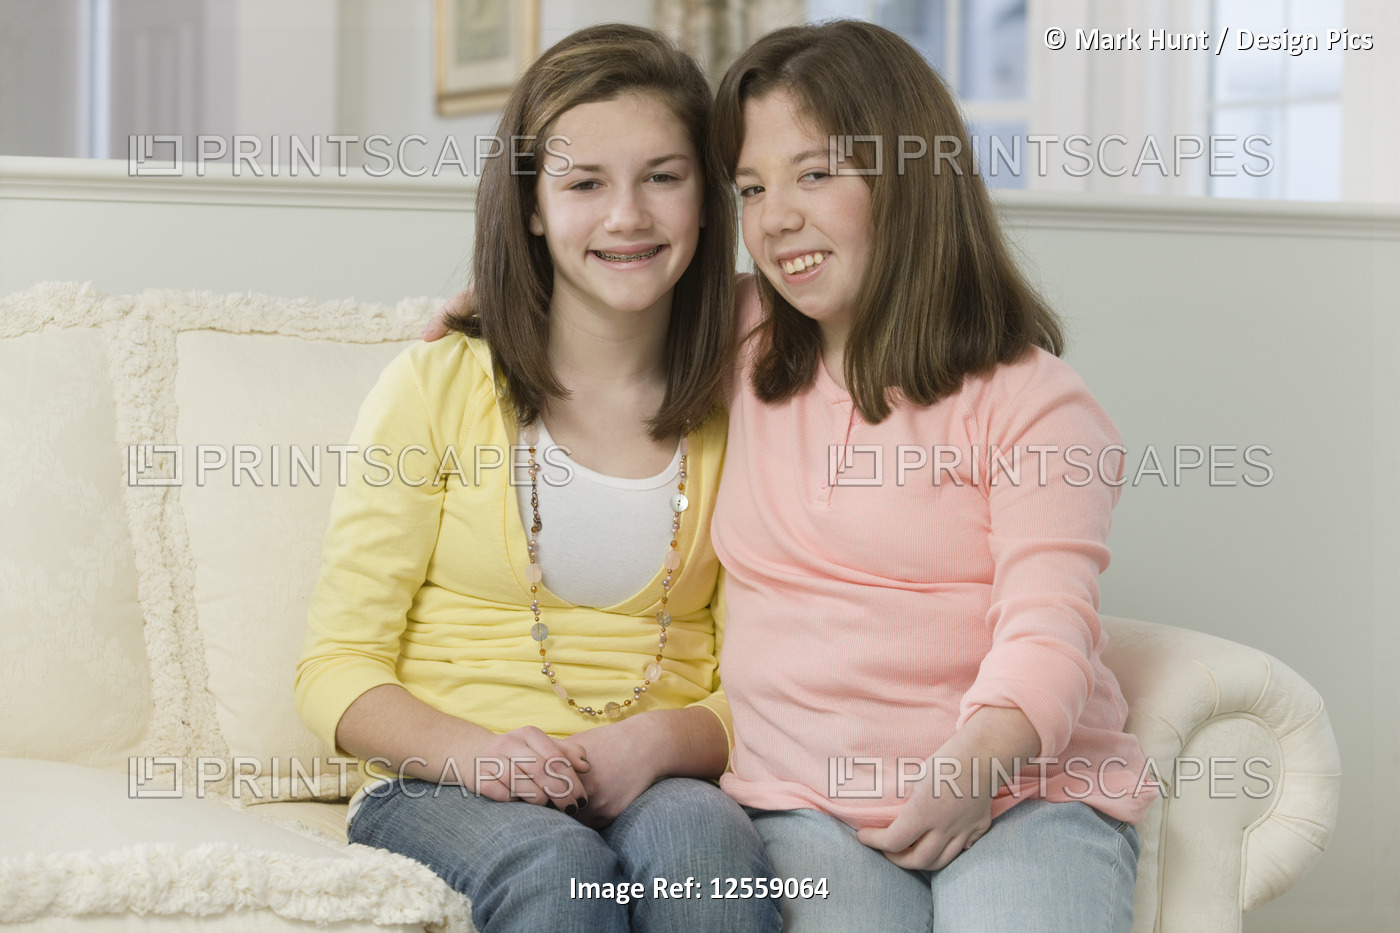 Two teenage girls sitting together, one with birth defect